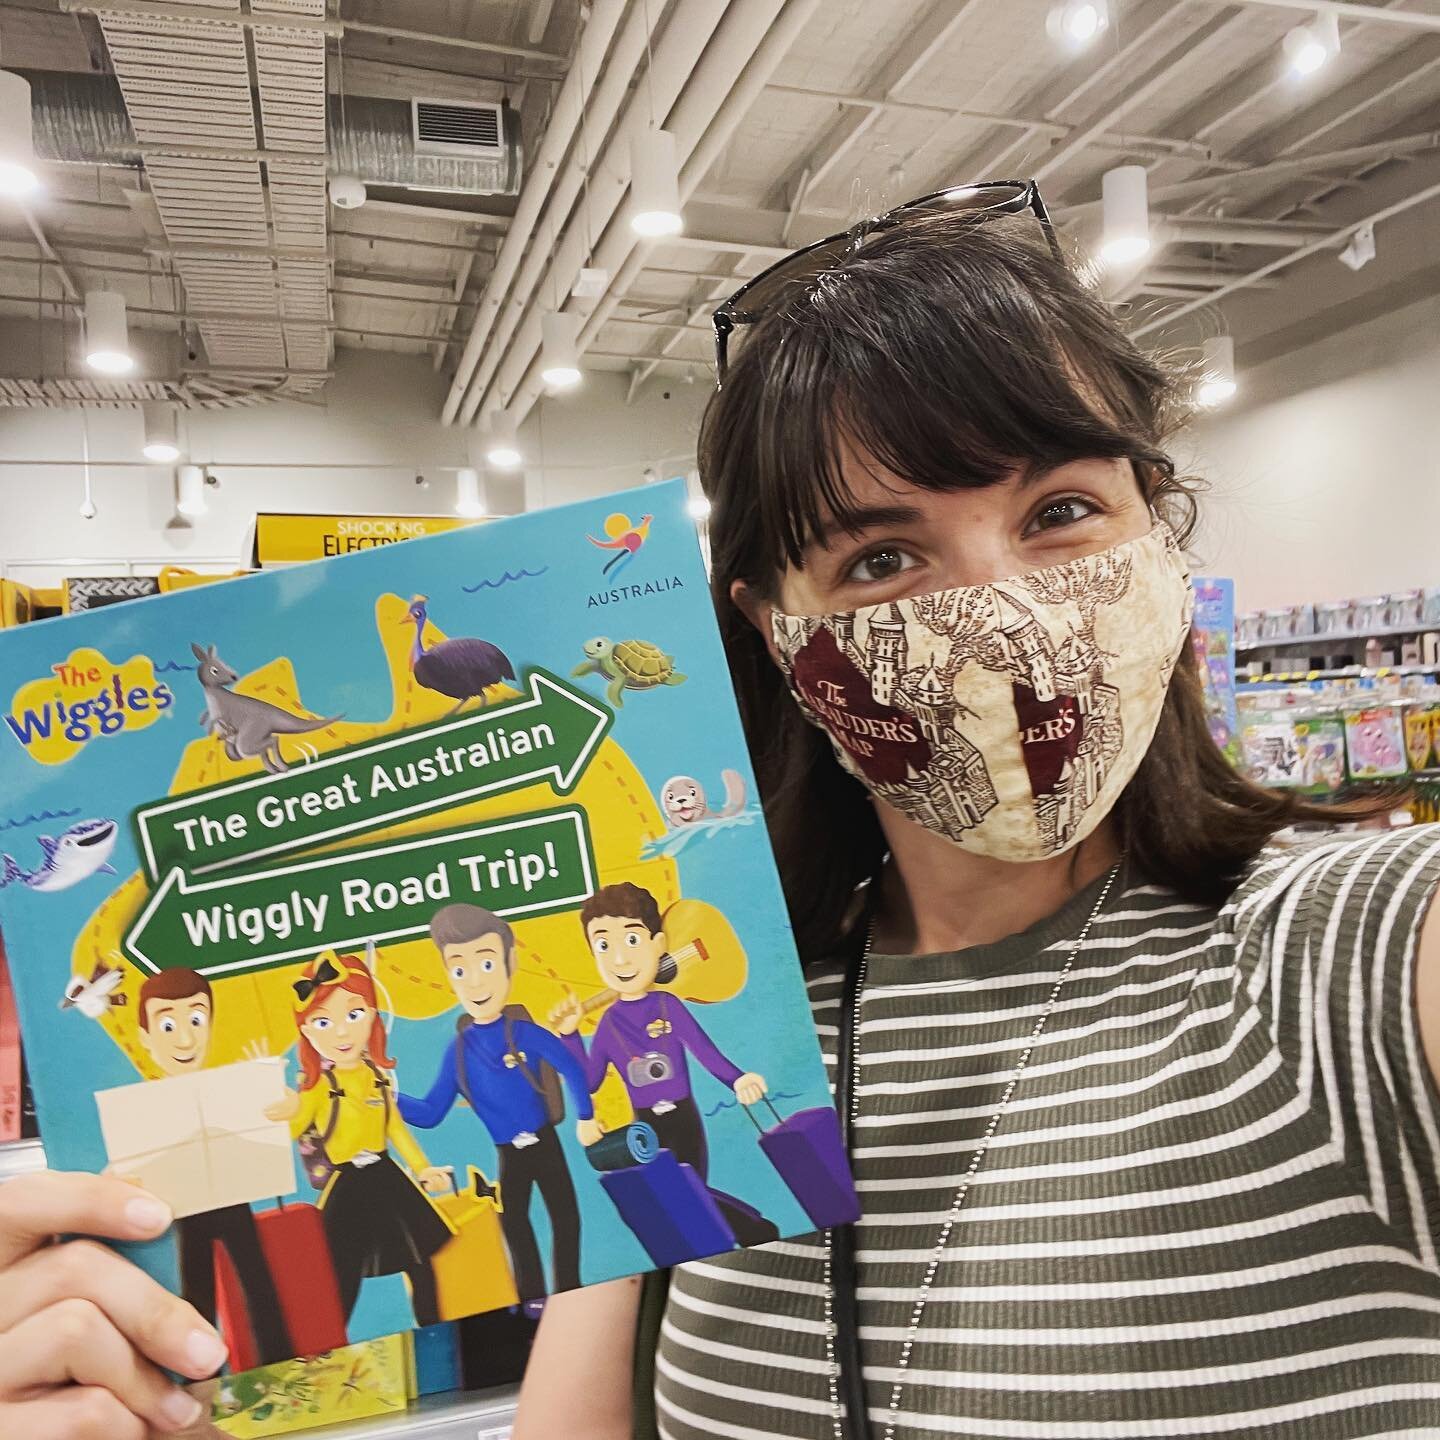 Super fun to see some of the things I have been working on for my day job come to the stores. As the graphic designer and illustrator for @thewiggles I spend most my time working on fun and exciting projects which I cannot share until release day and